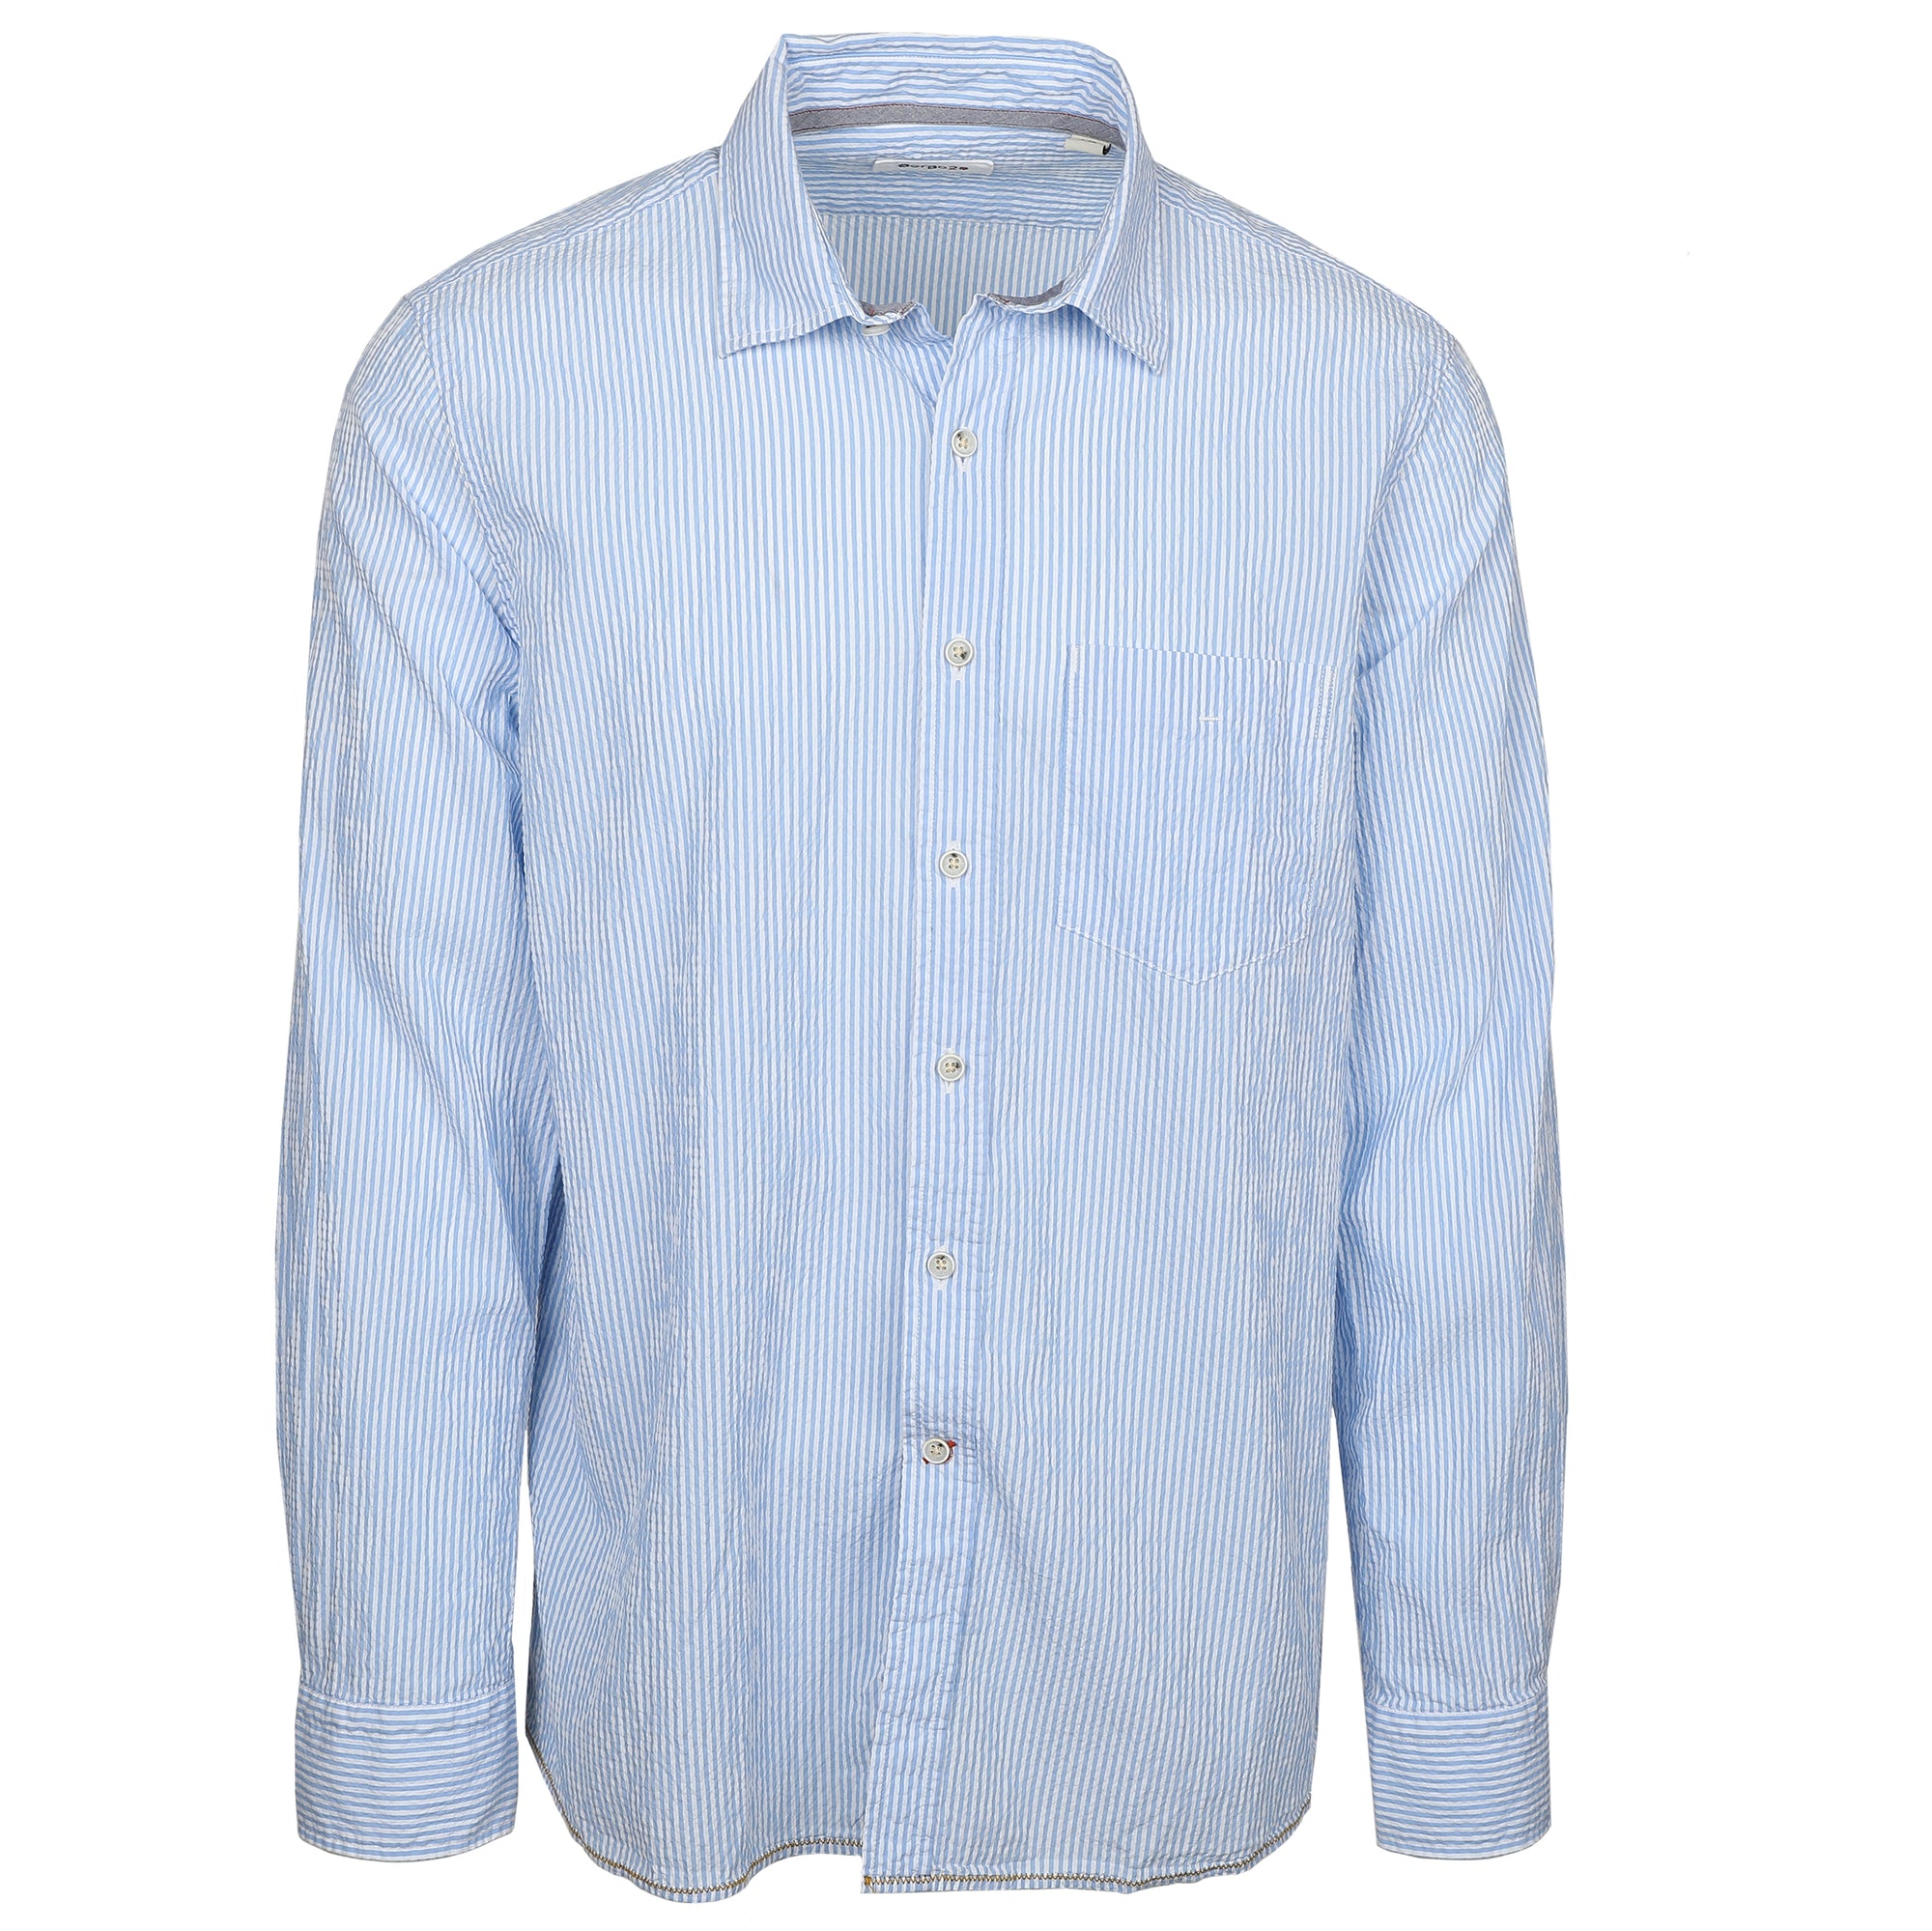 Look oh-so-cool and stay feeling hot with this Maratea Blue Seersucker Garment Dyed Long Sleeve Shirt. Crafted from lightweight seersucker fabric that's craft fully dyed for a unique look, you'll be ready for warm weather, whatever the season. Pucker up for a style that'll have onlookers in awe.  100% Cotton • Long Sleeve • Spread Collar • Button Cuff • No Chest Pocket • Machine Wash • Made in Italy 